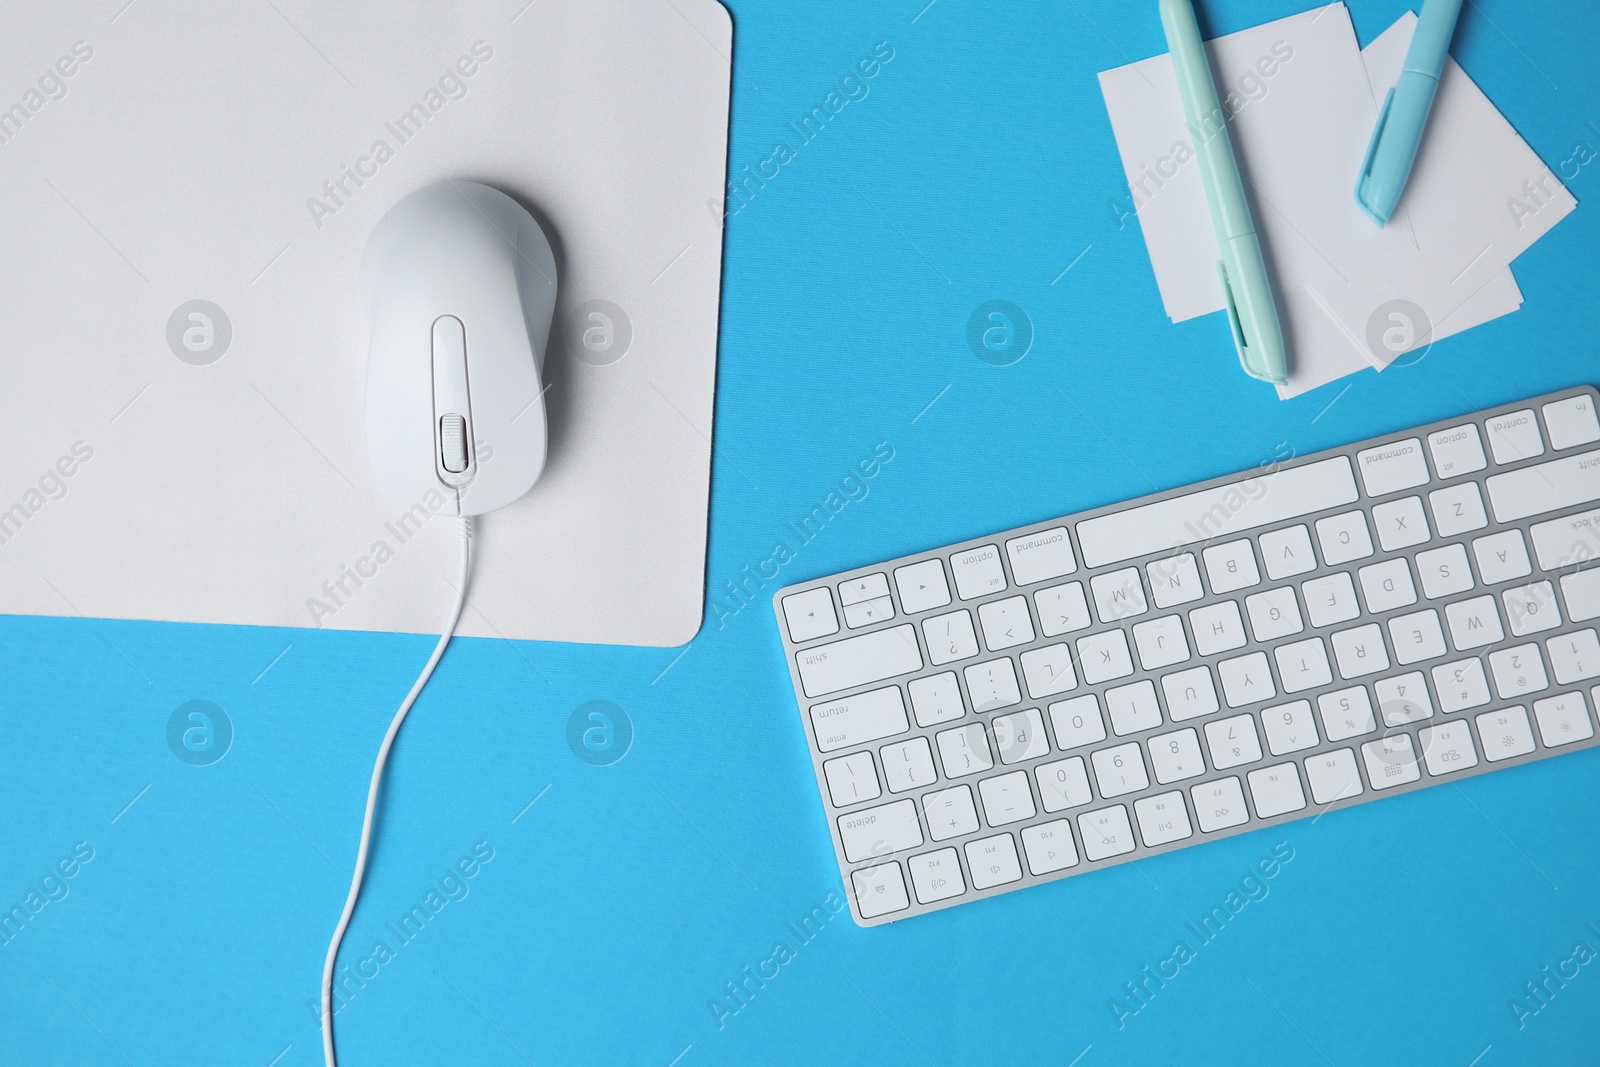 Photo of Wired mouse with mousepad, stationery and computer keyboard on light blue background, flat lay